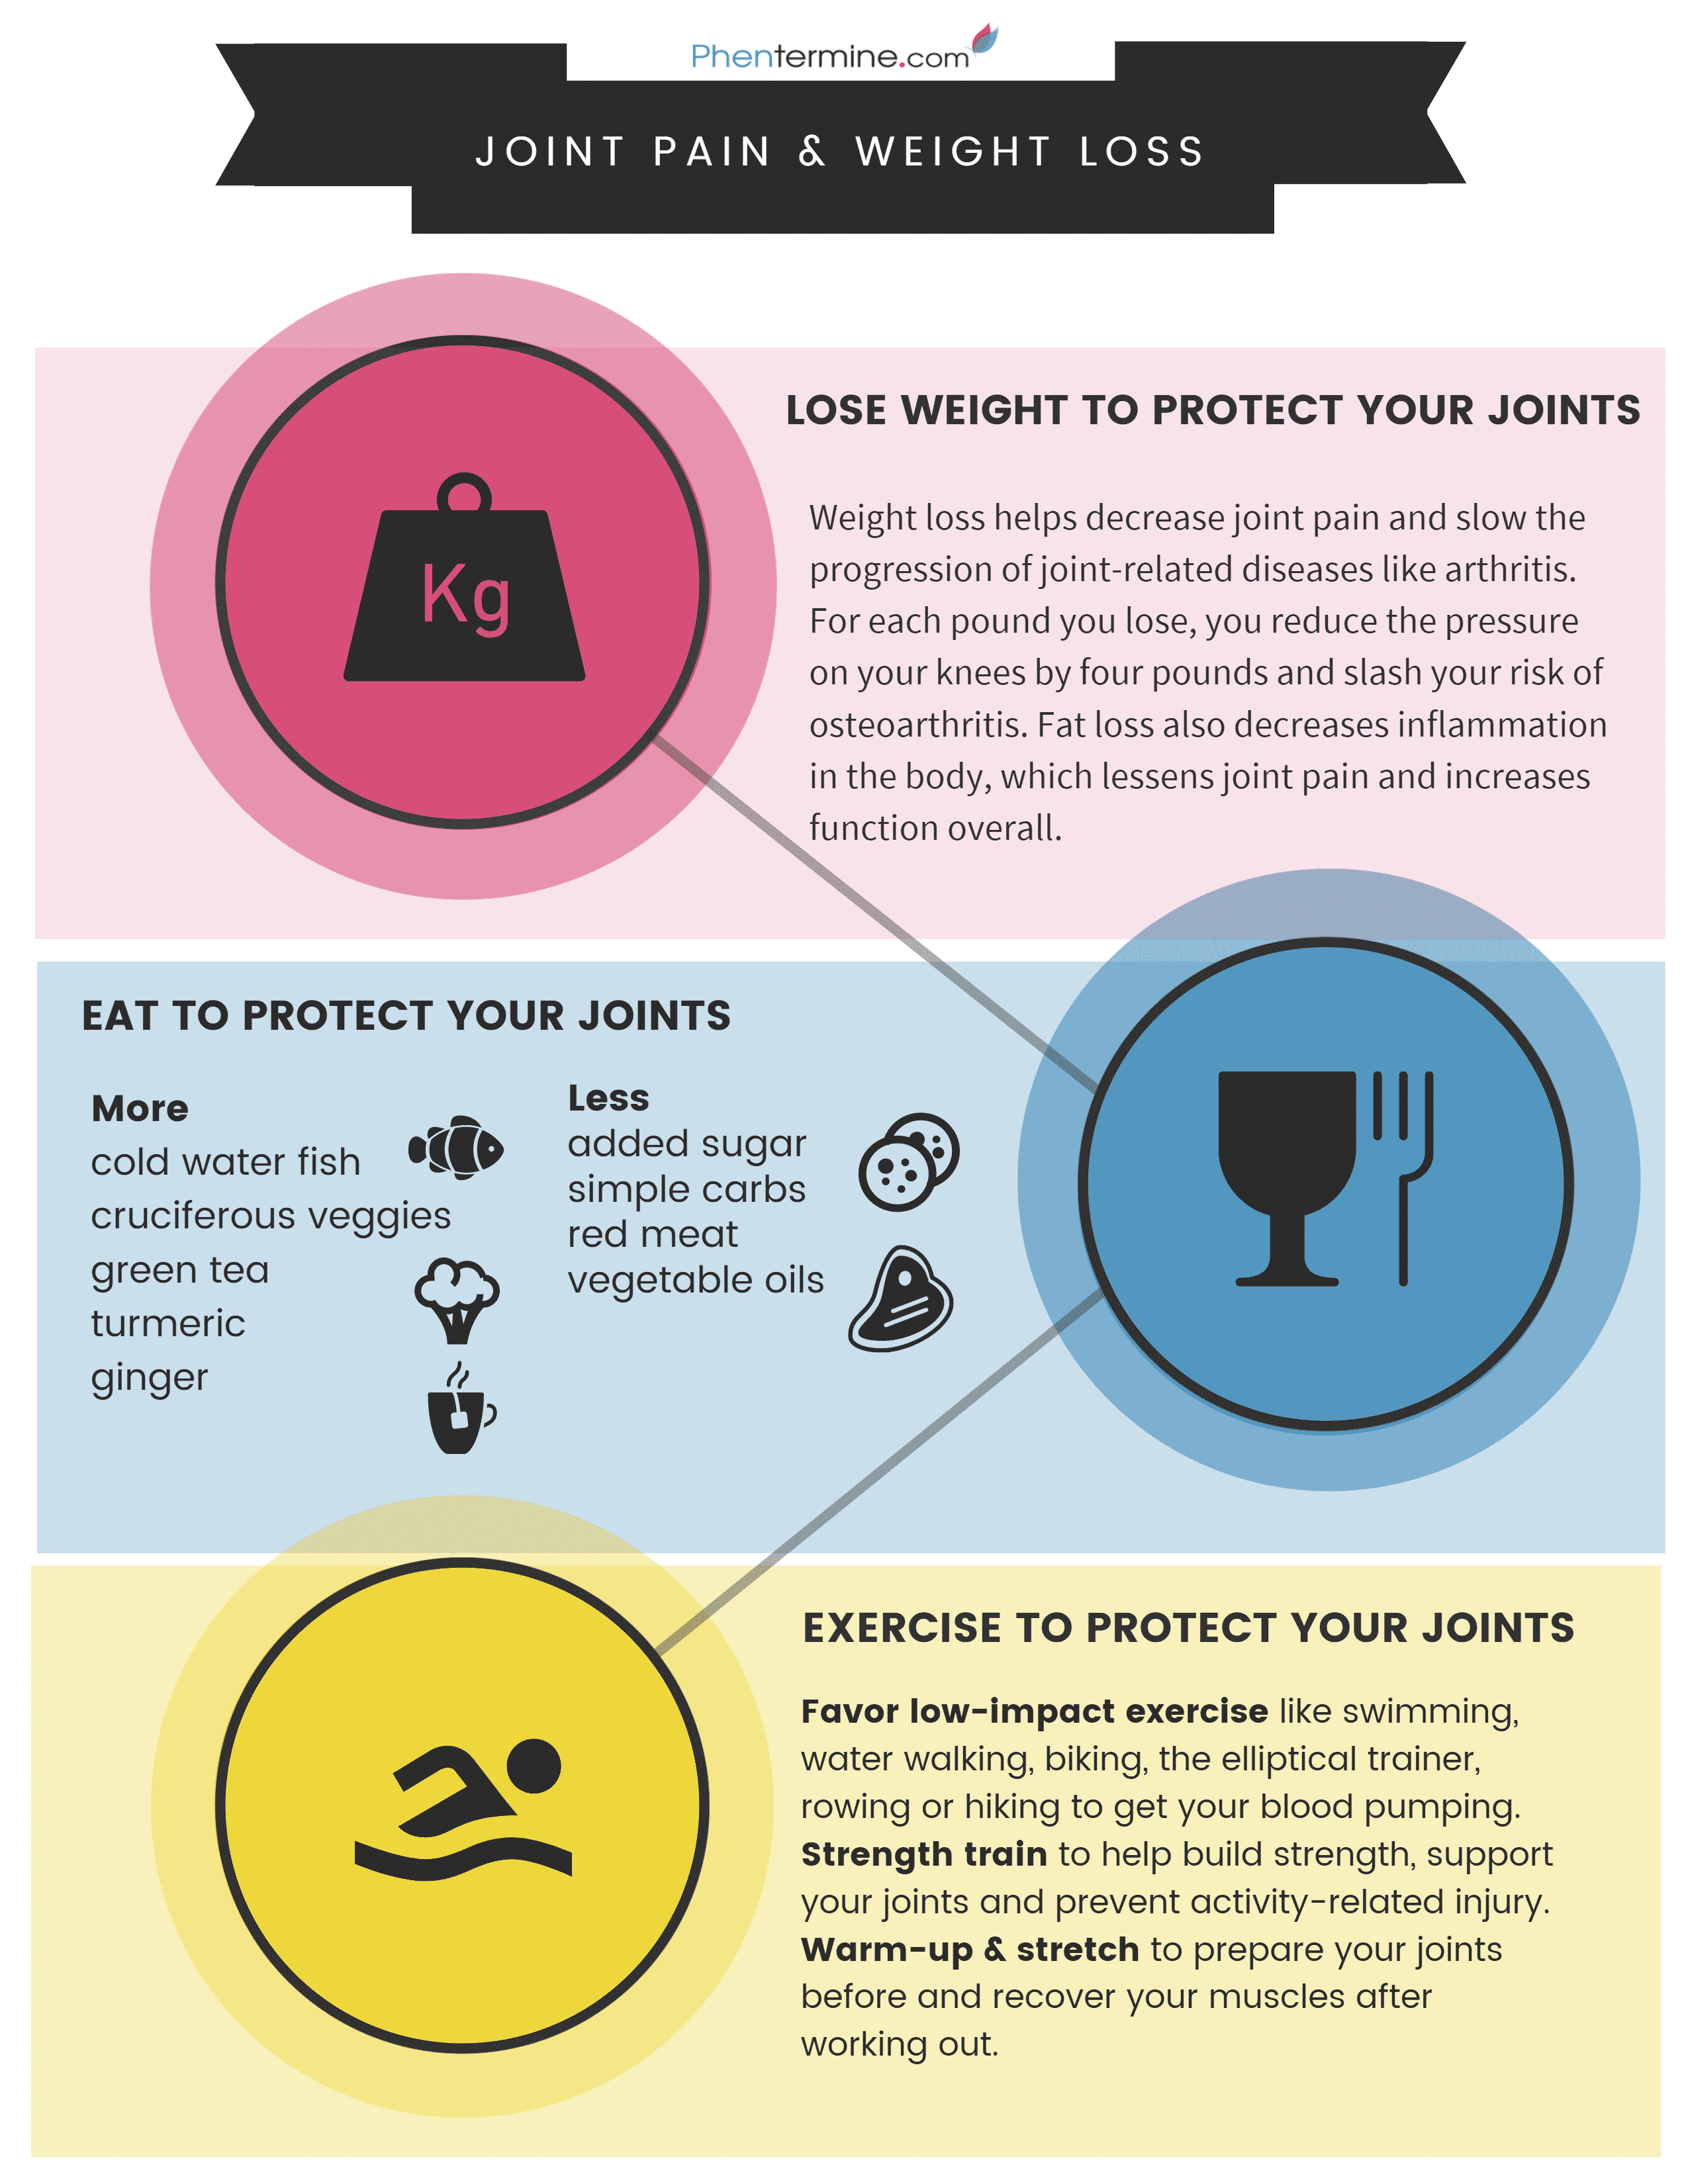 joint pain and weight loss infographic for phentermine users